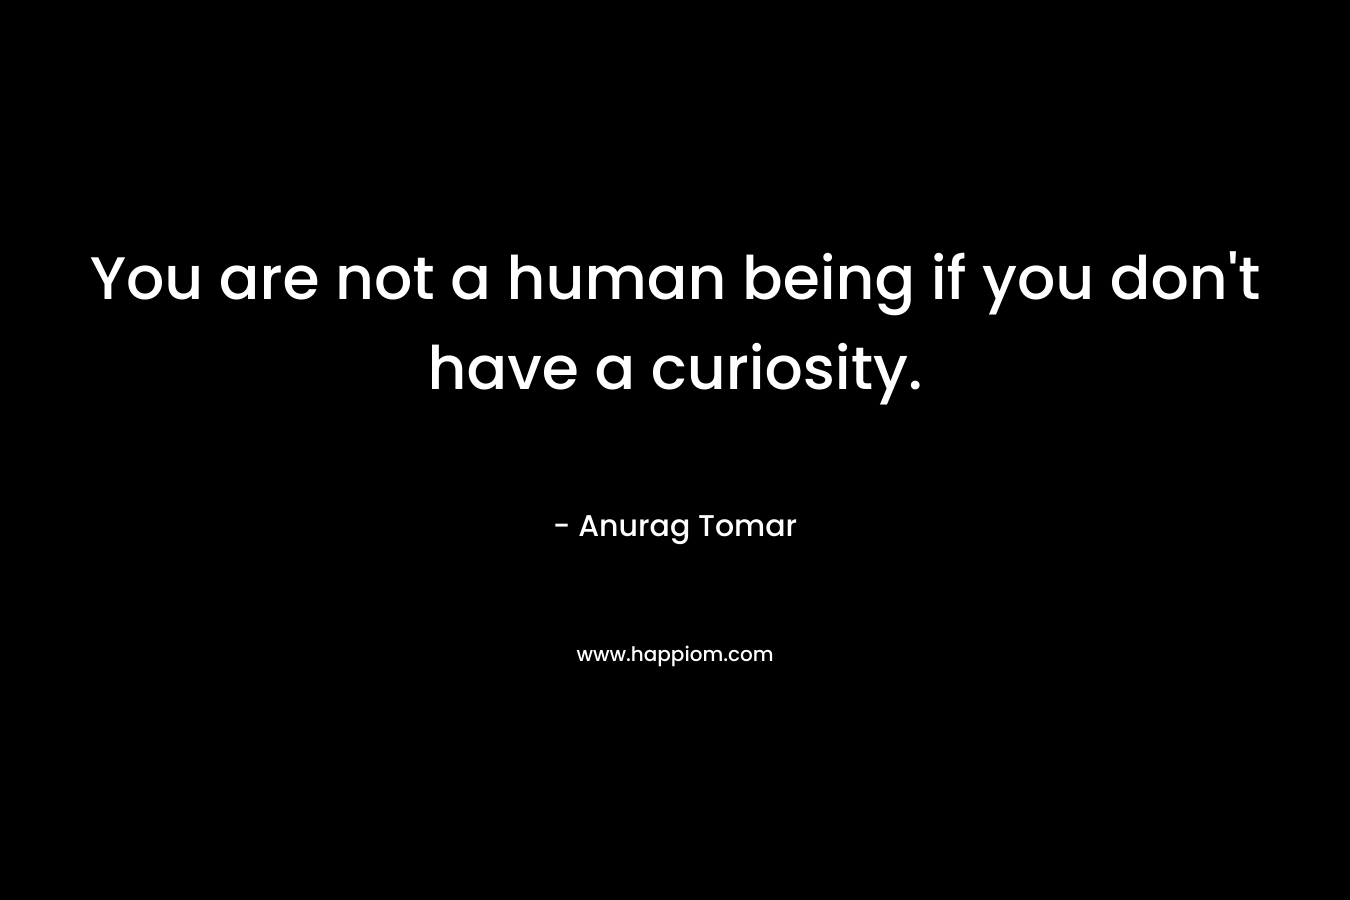 You are not a human being if you don't have a curiosity.